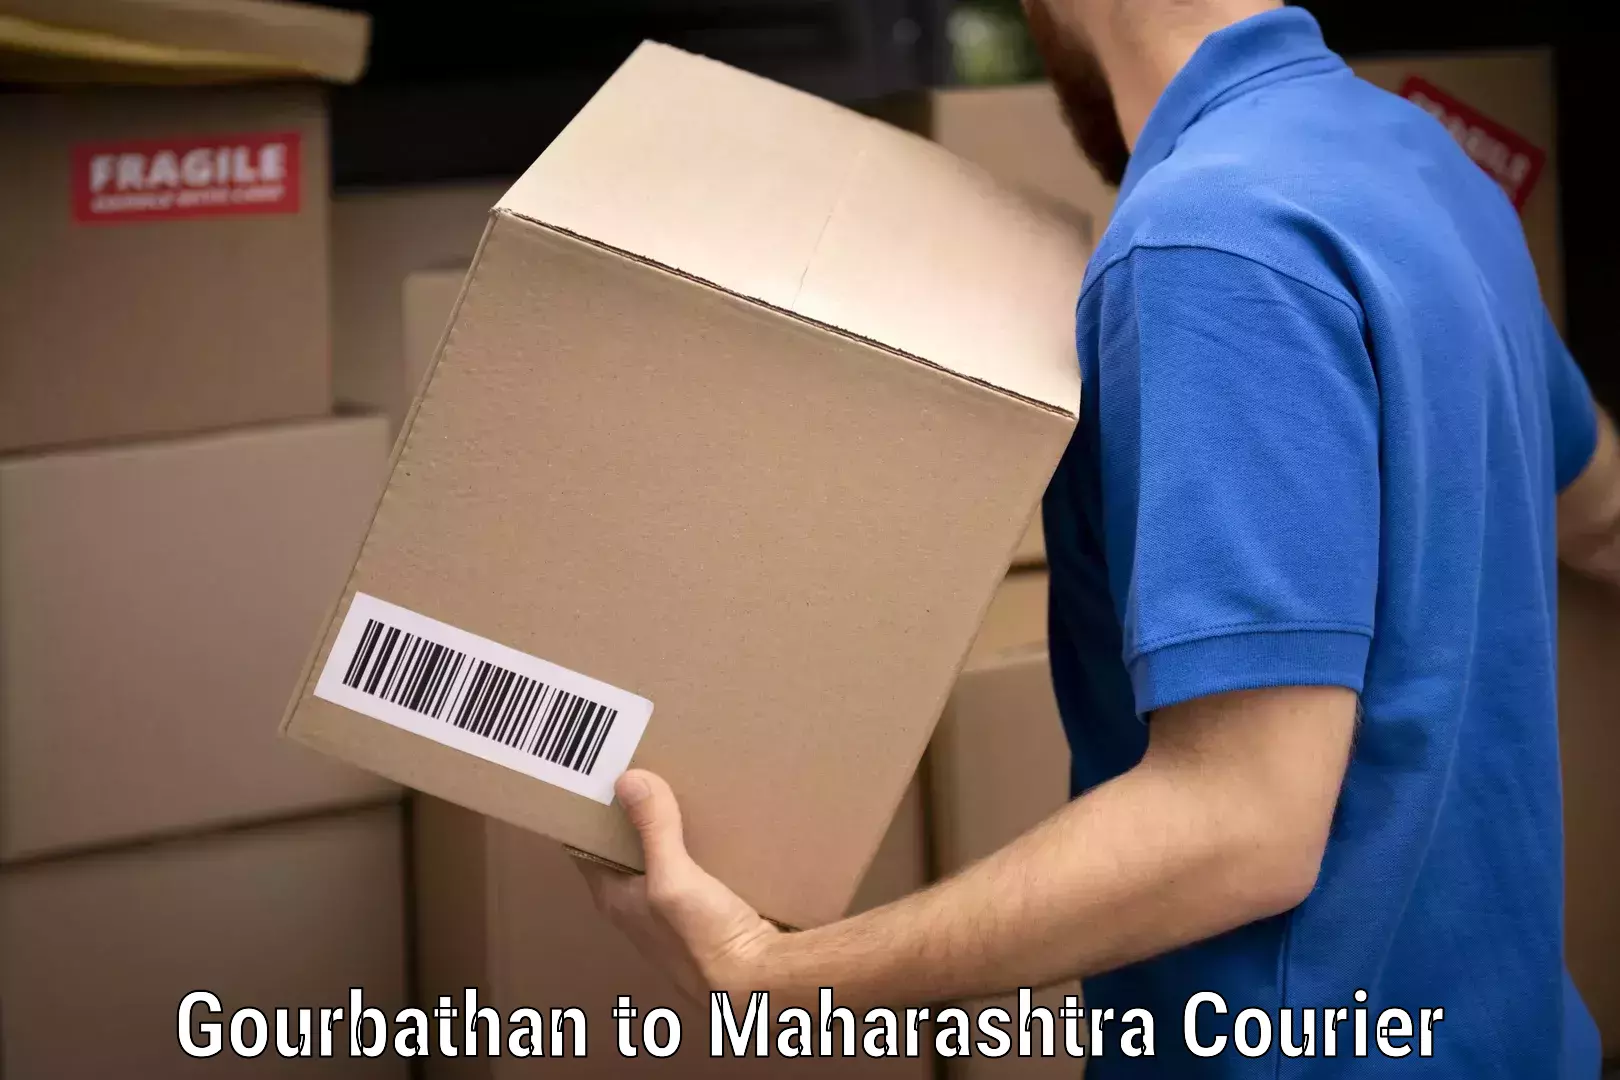 Trusted relocation experts Gourbathan to Maharashtra